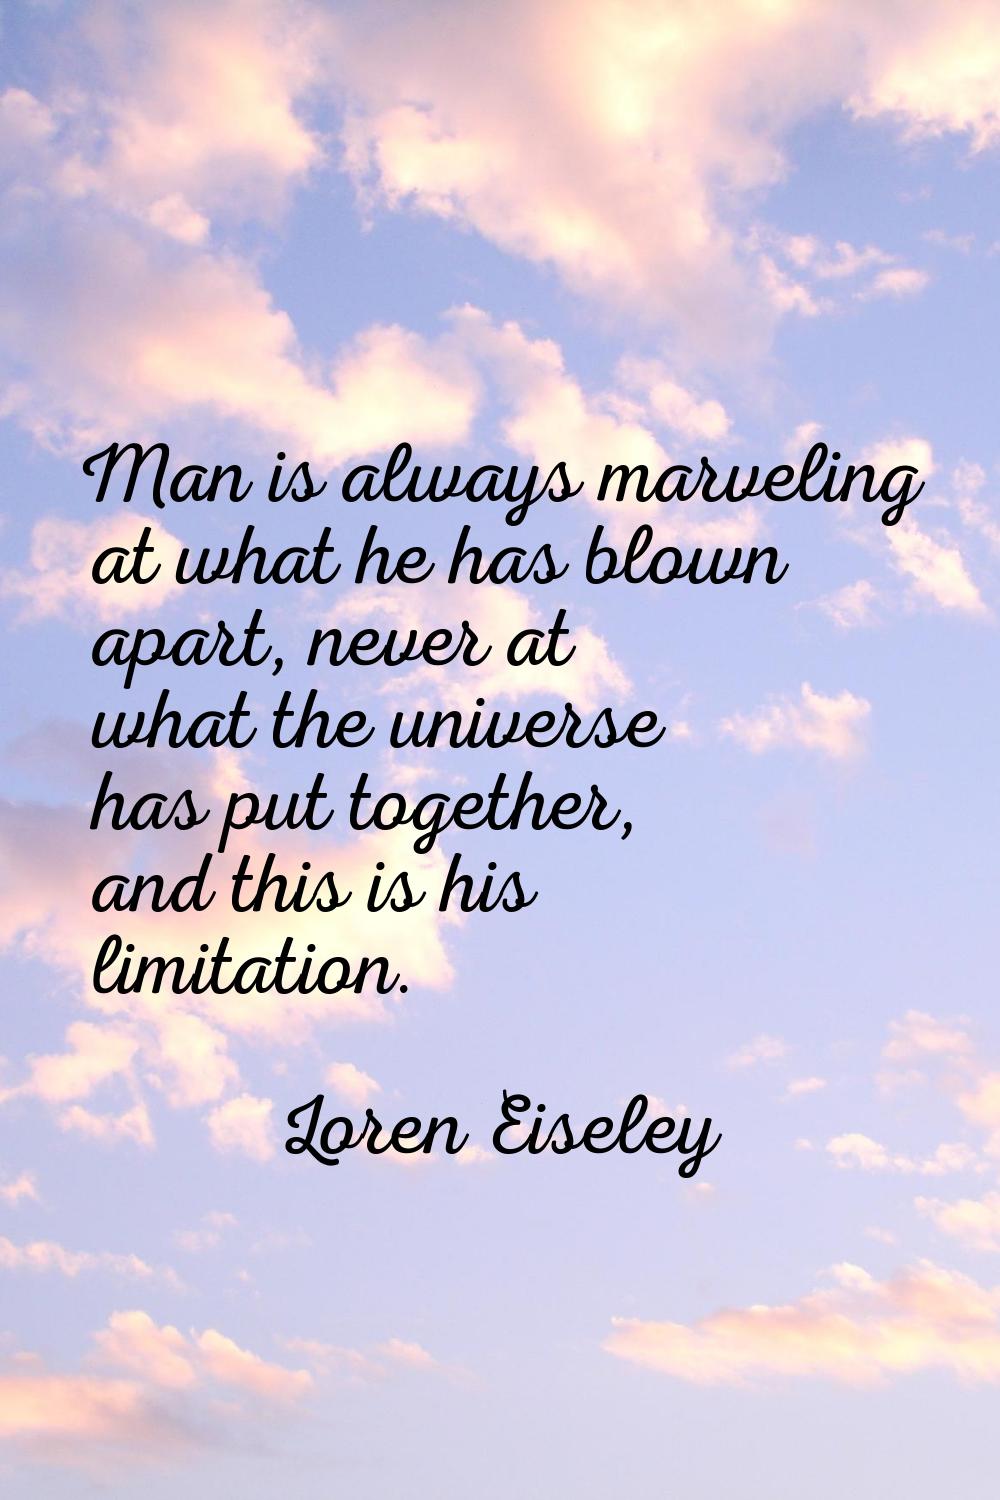 Man is always marveling at what he has blown apart, never at what the universe has put together, an